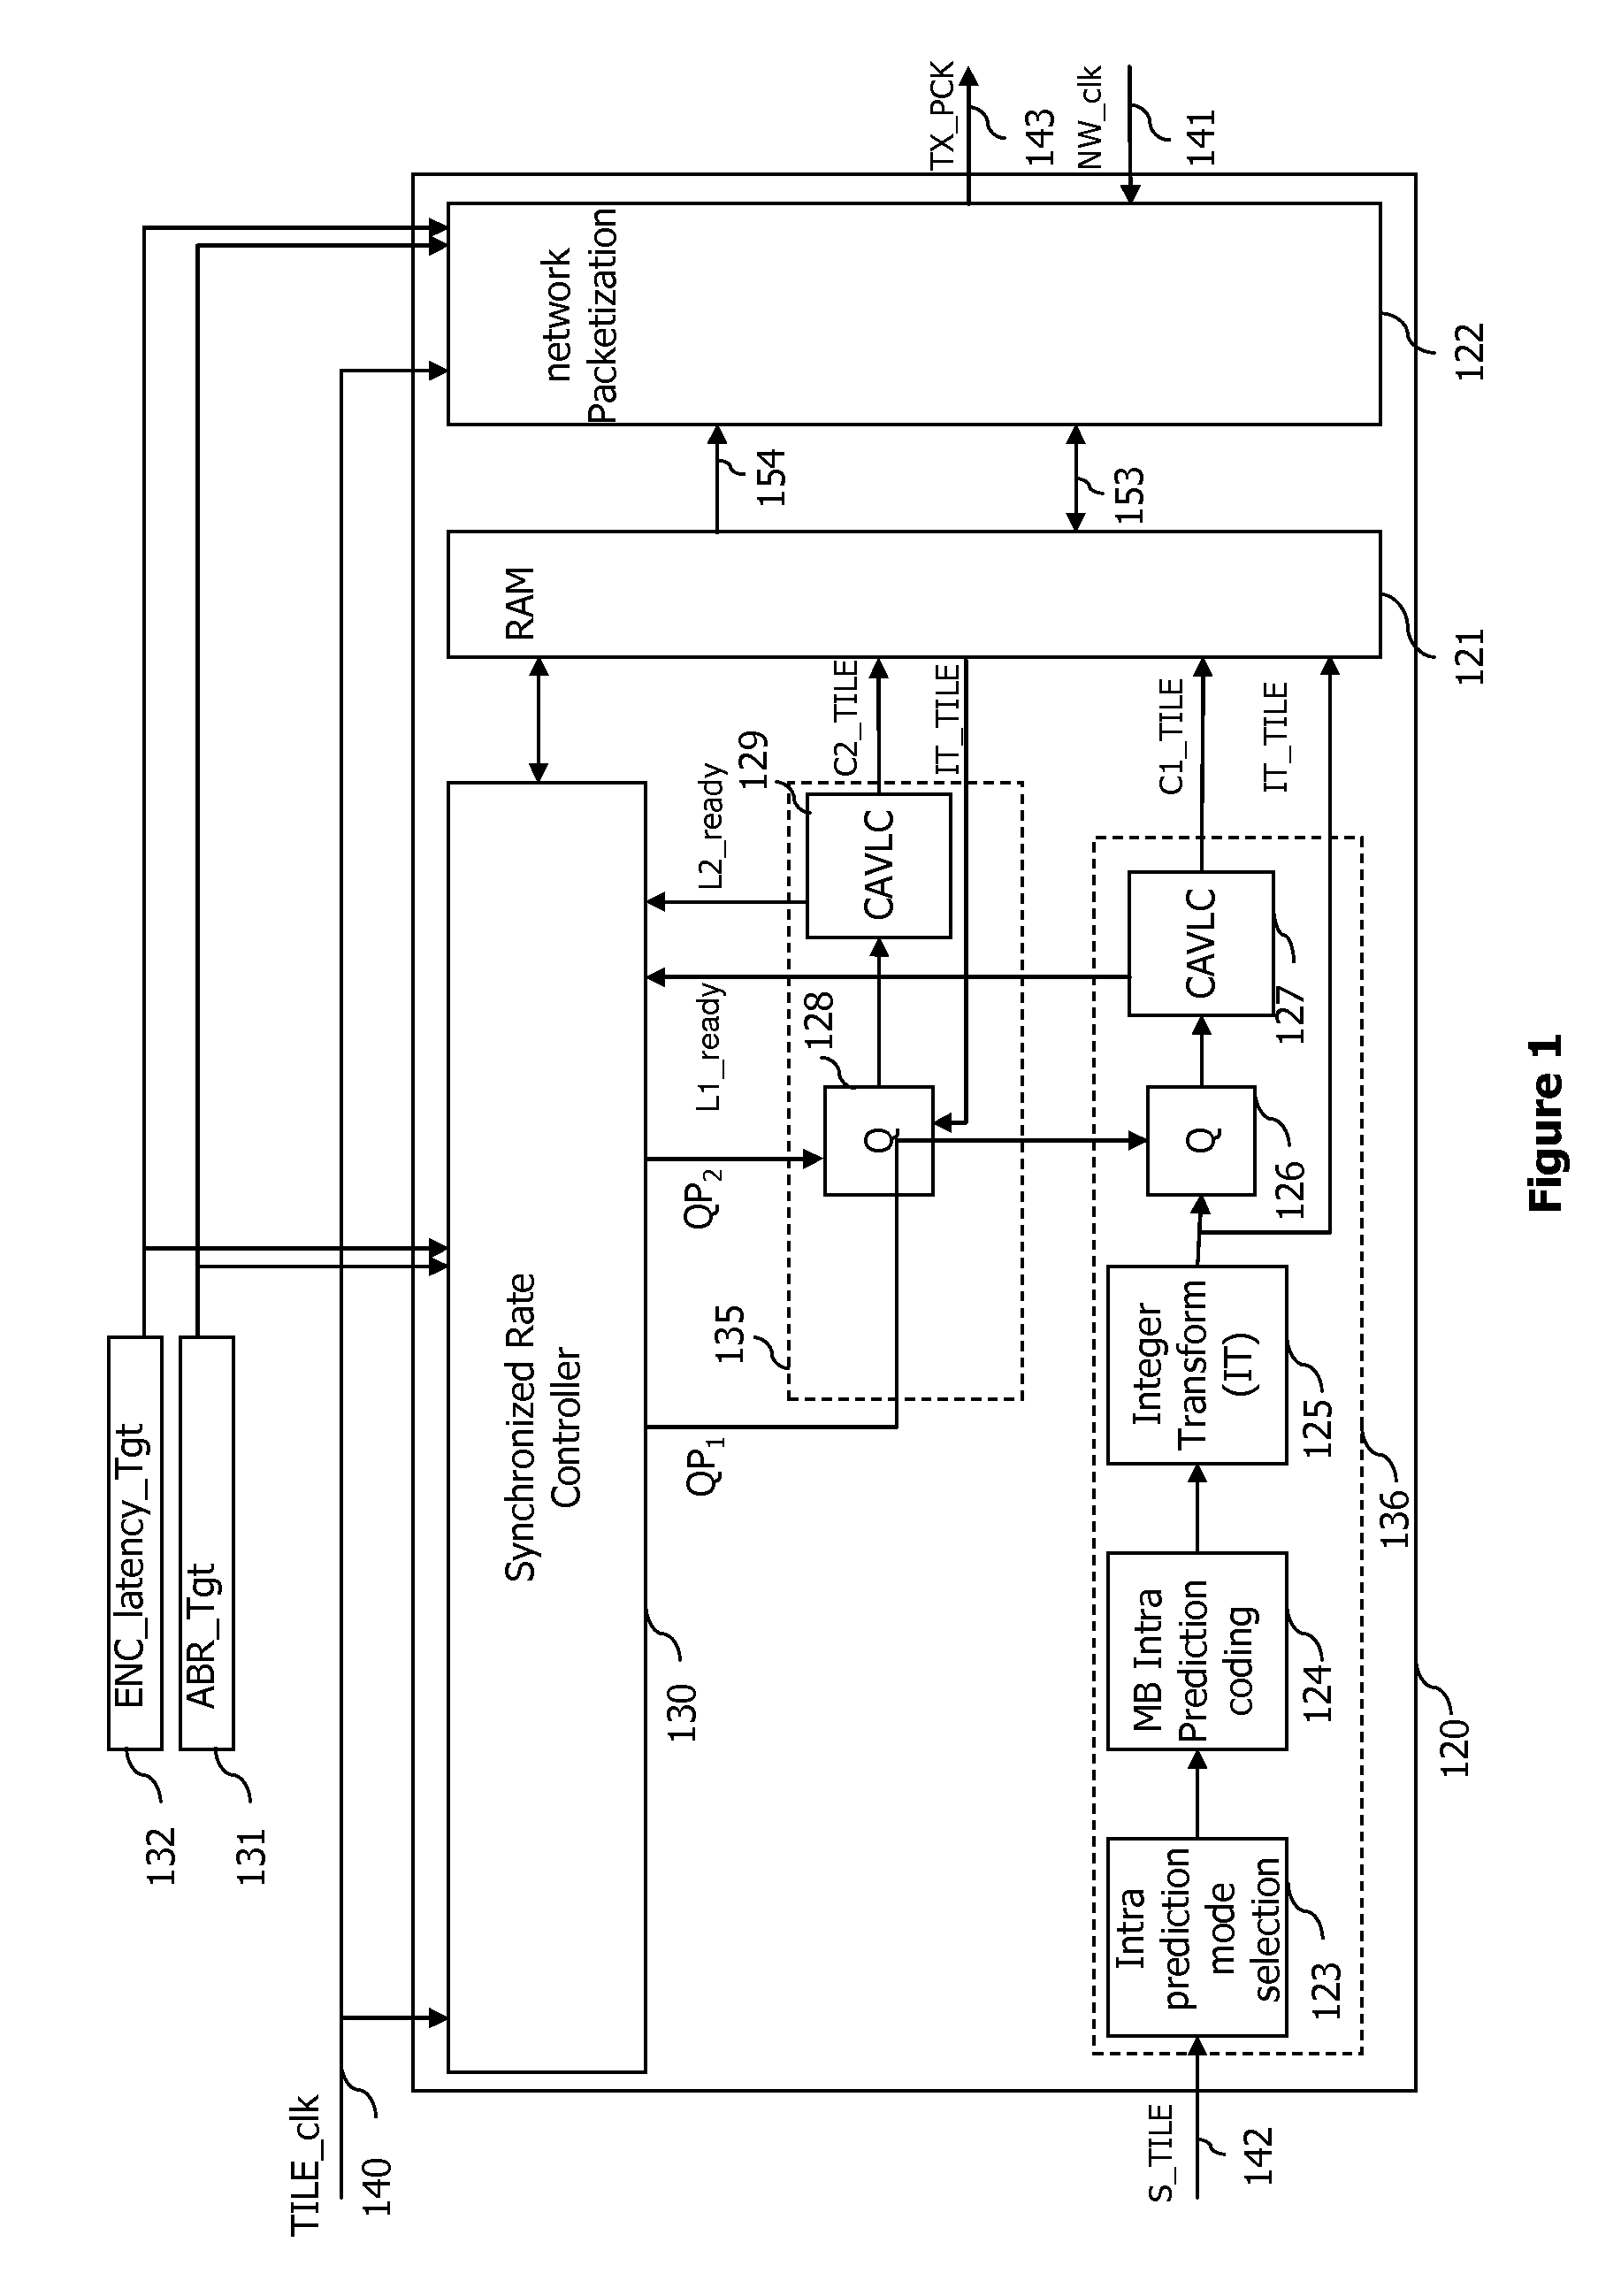 Method for Sending Compressed Data Representing a Digital Image and Corresponding Device